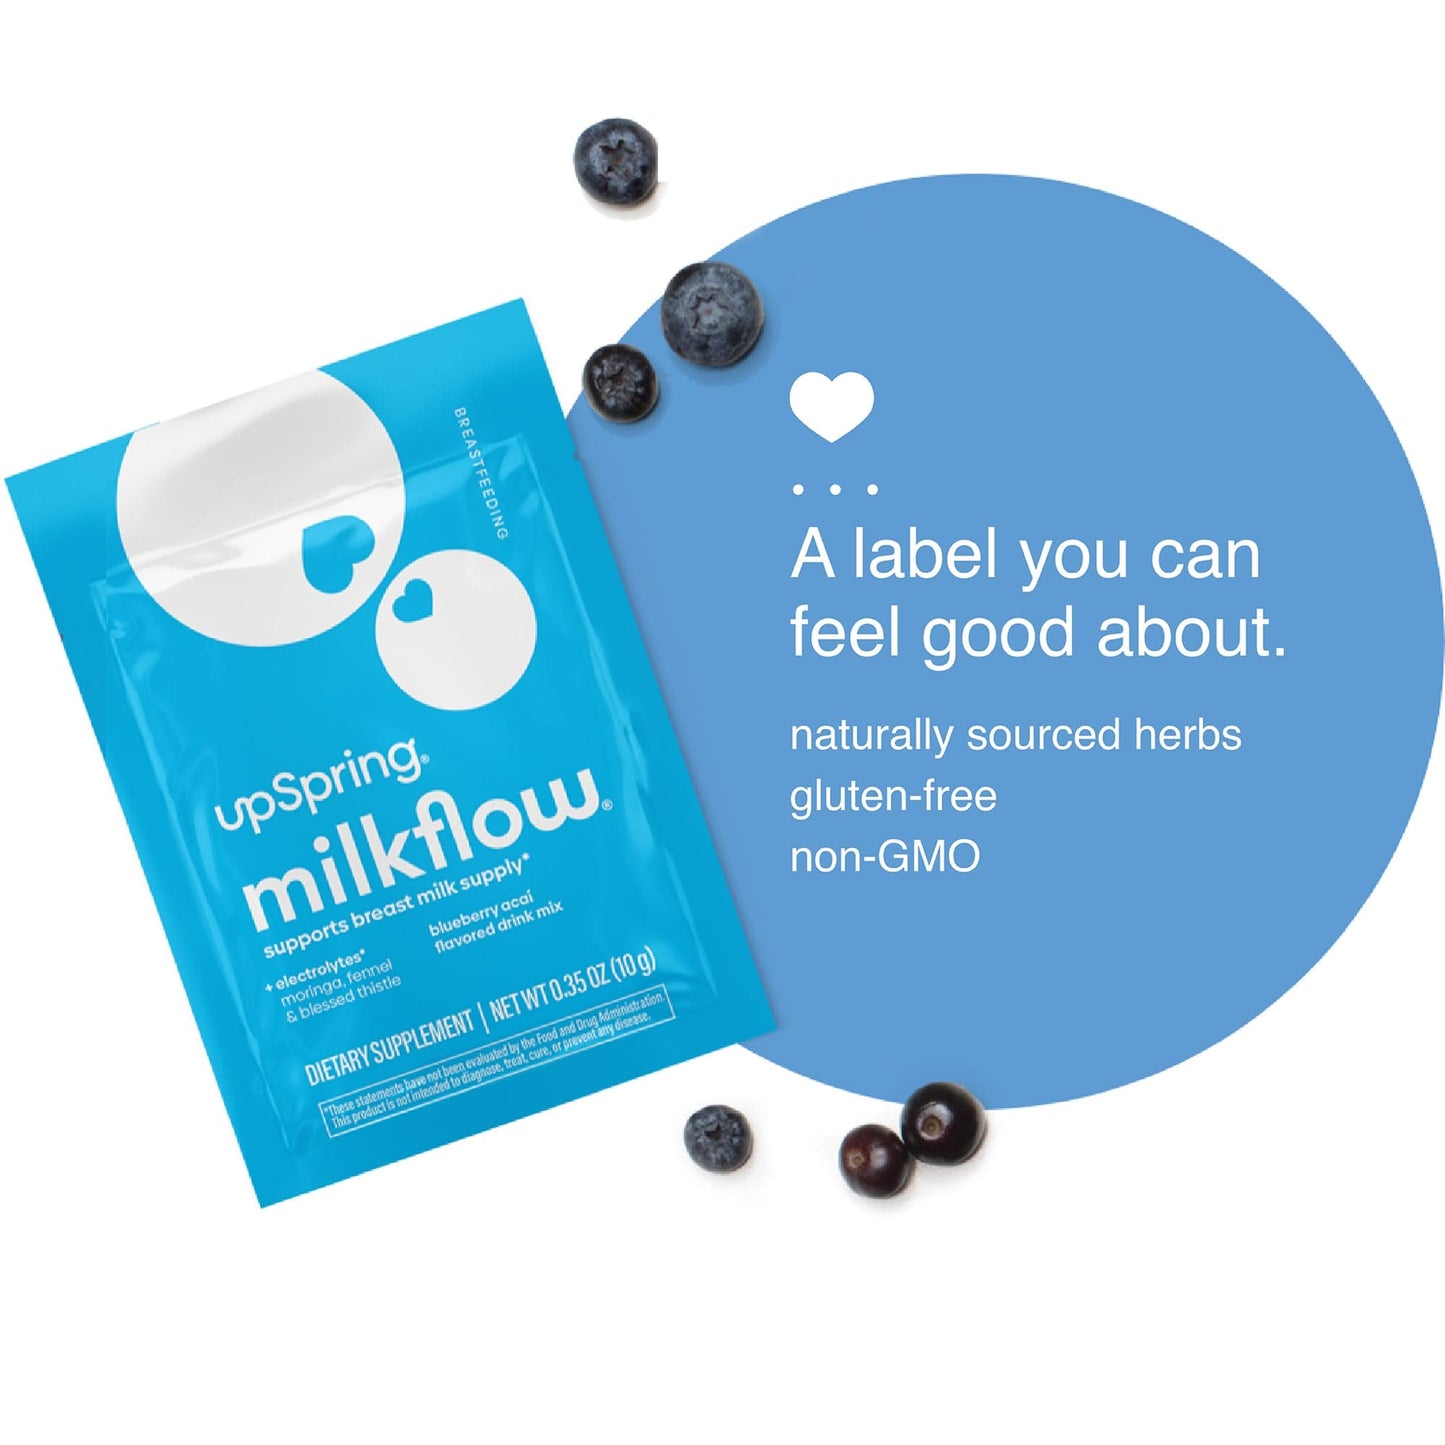 MilkFlow contains naturally sourced herbs, is gluten-free, non-GMO